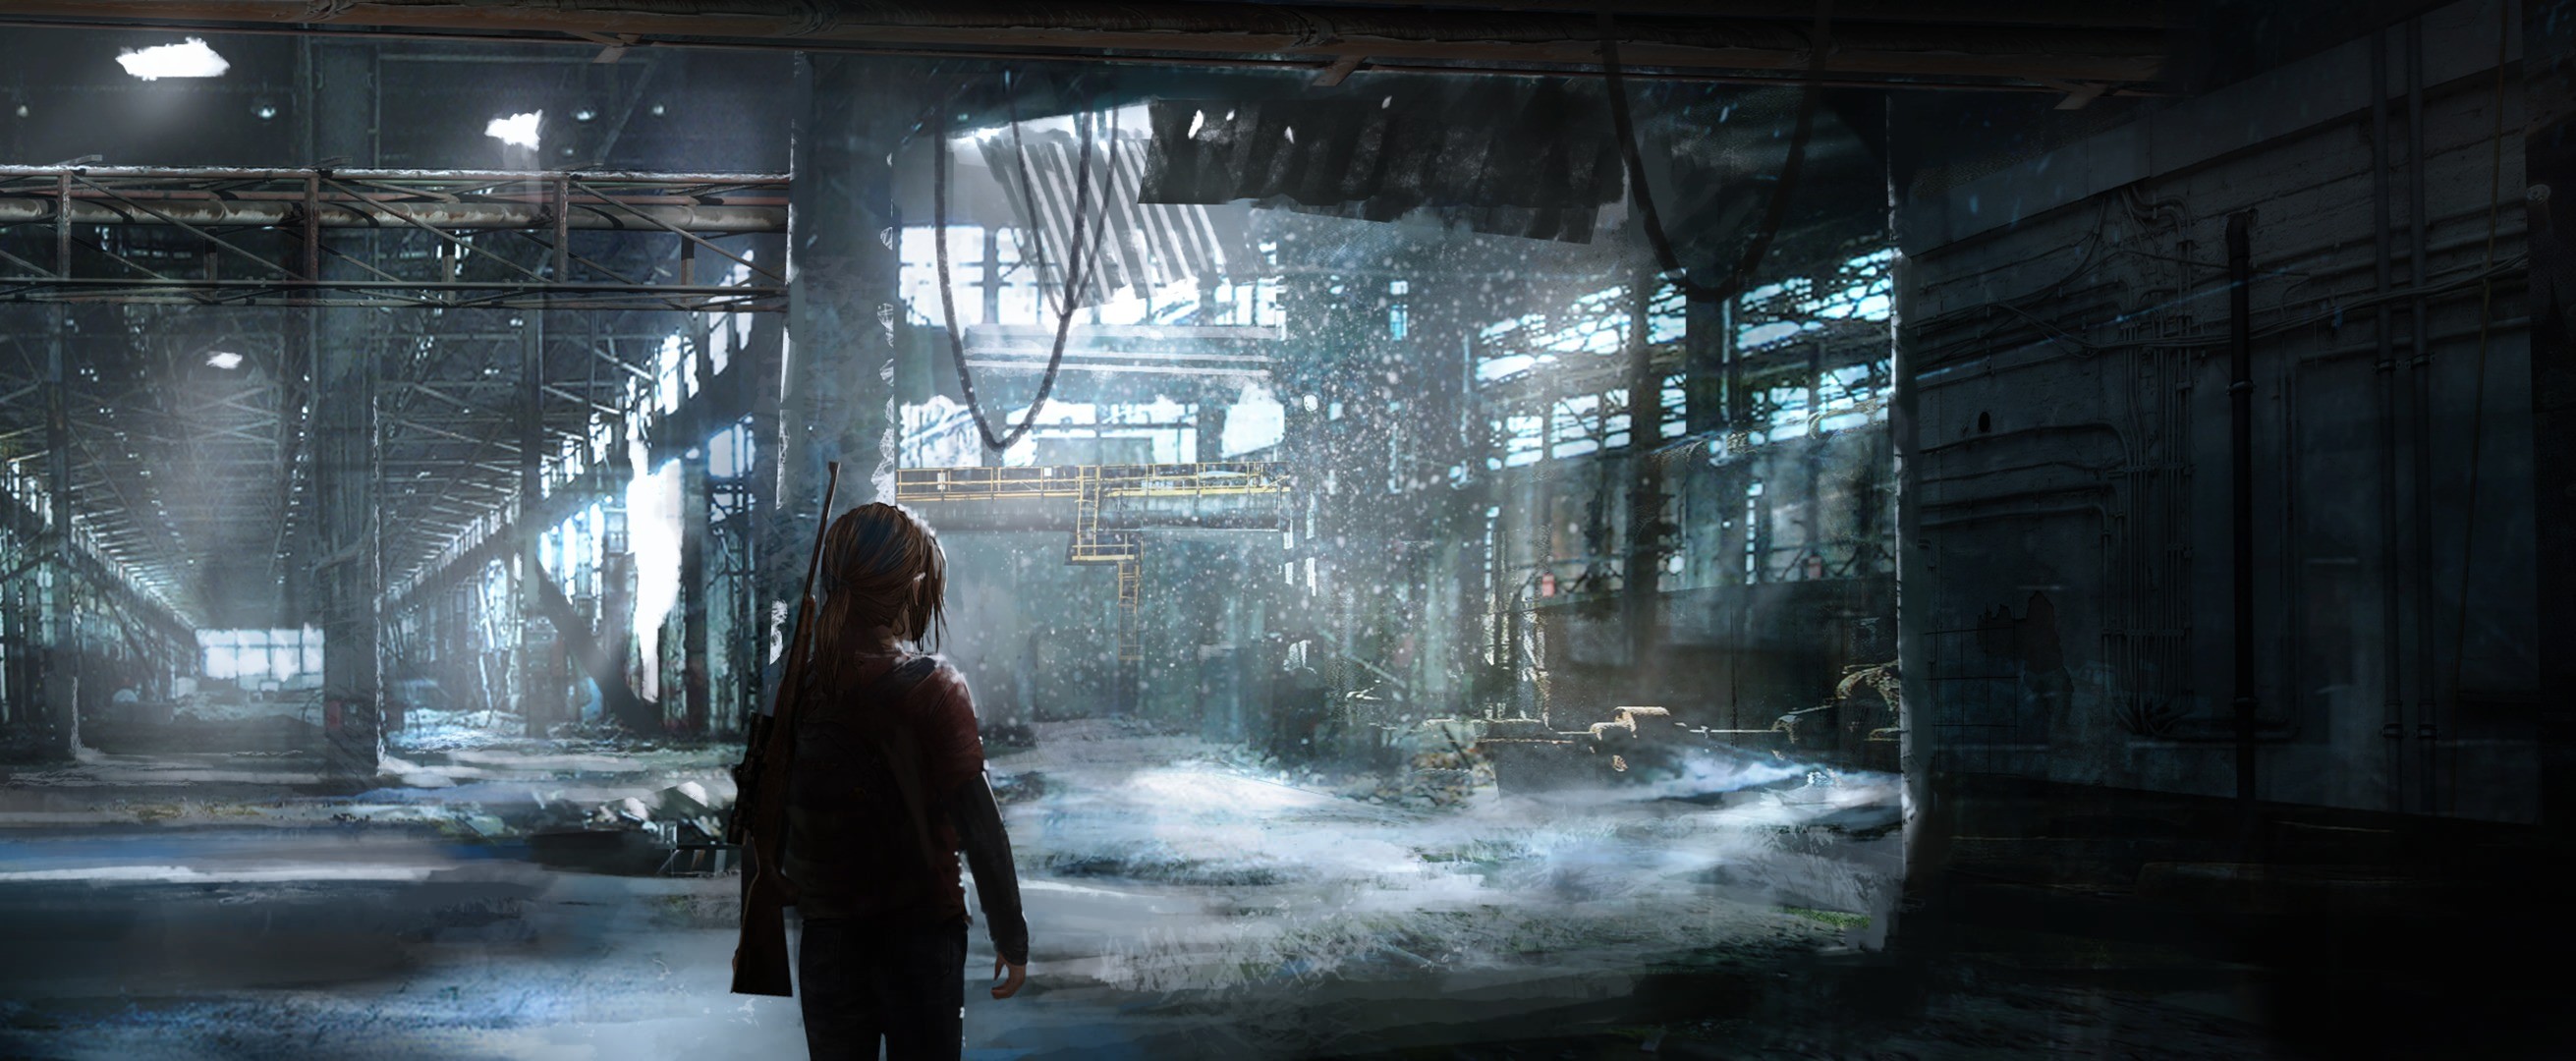 General 2622x1080 The Last of Us video games apocalyptic video game art science fiction rifles